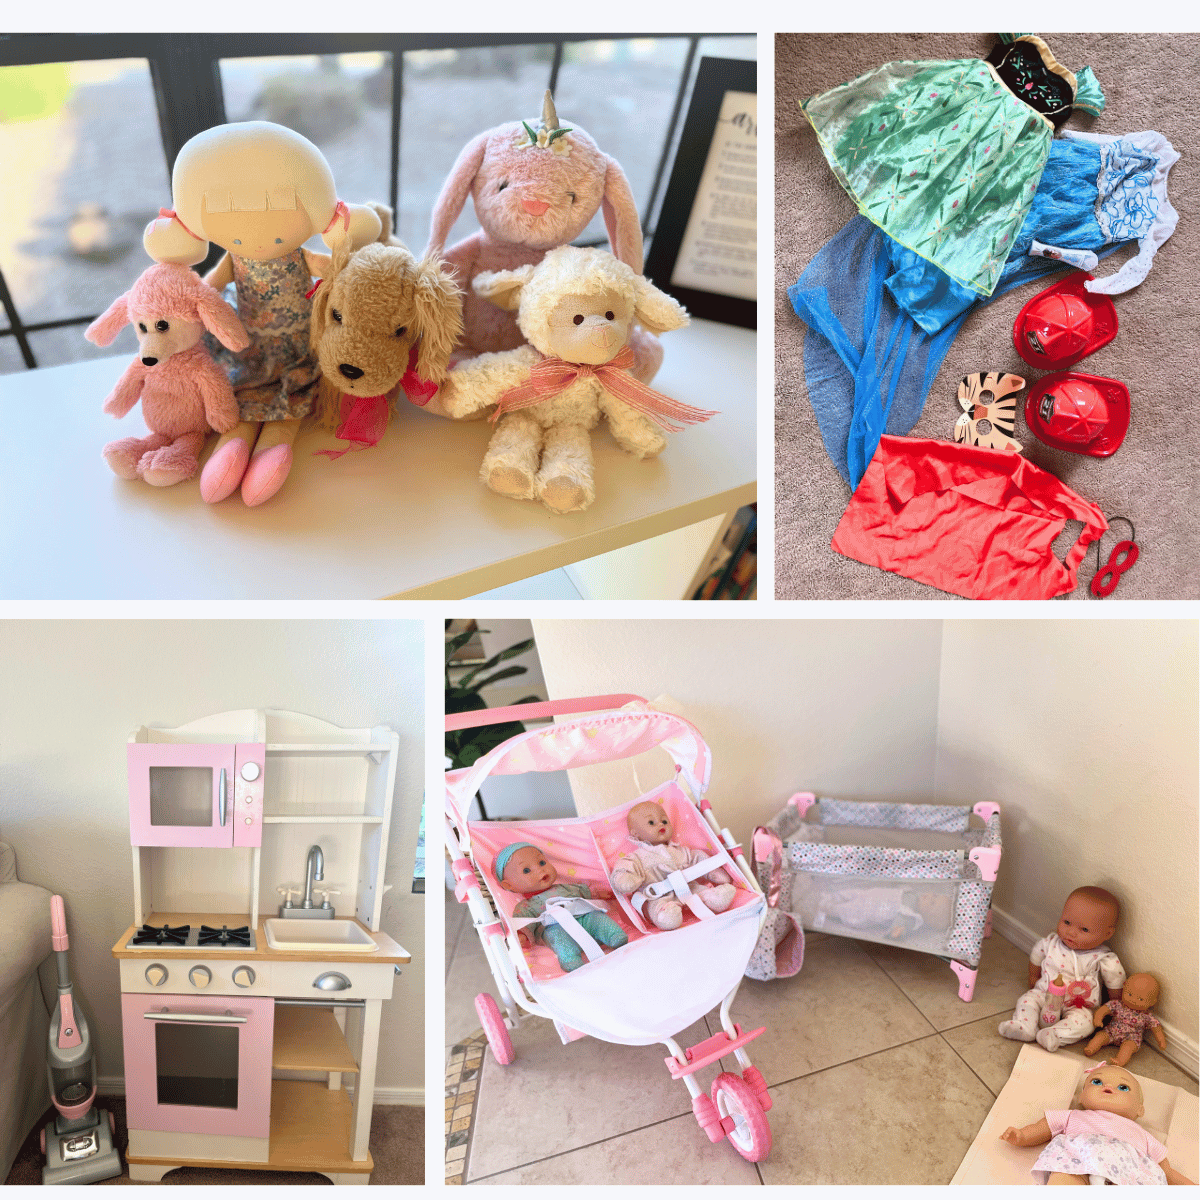 stuffed animals, dress up clothes, play kitchen and doll accessories